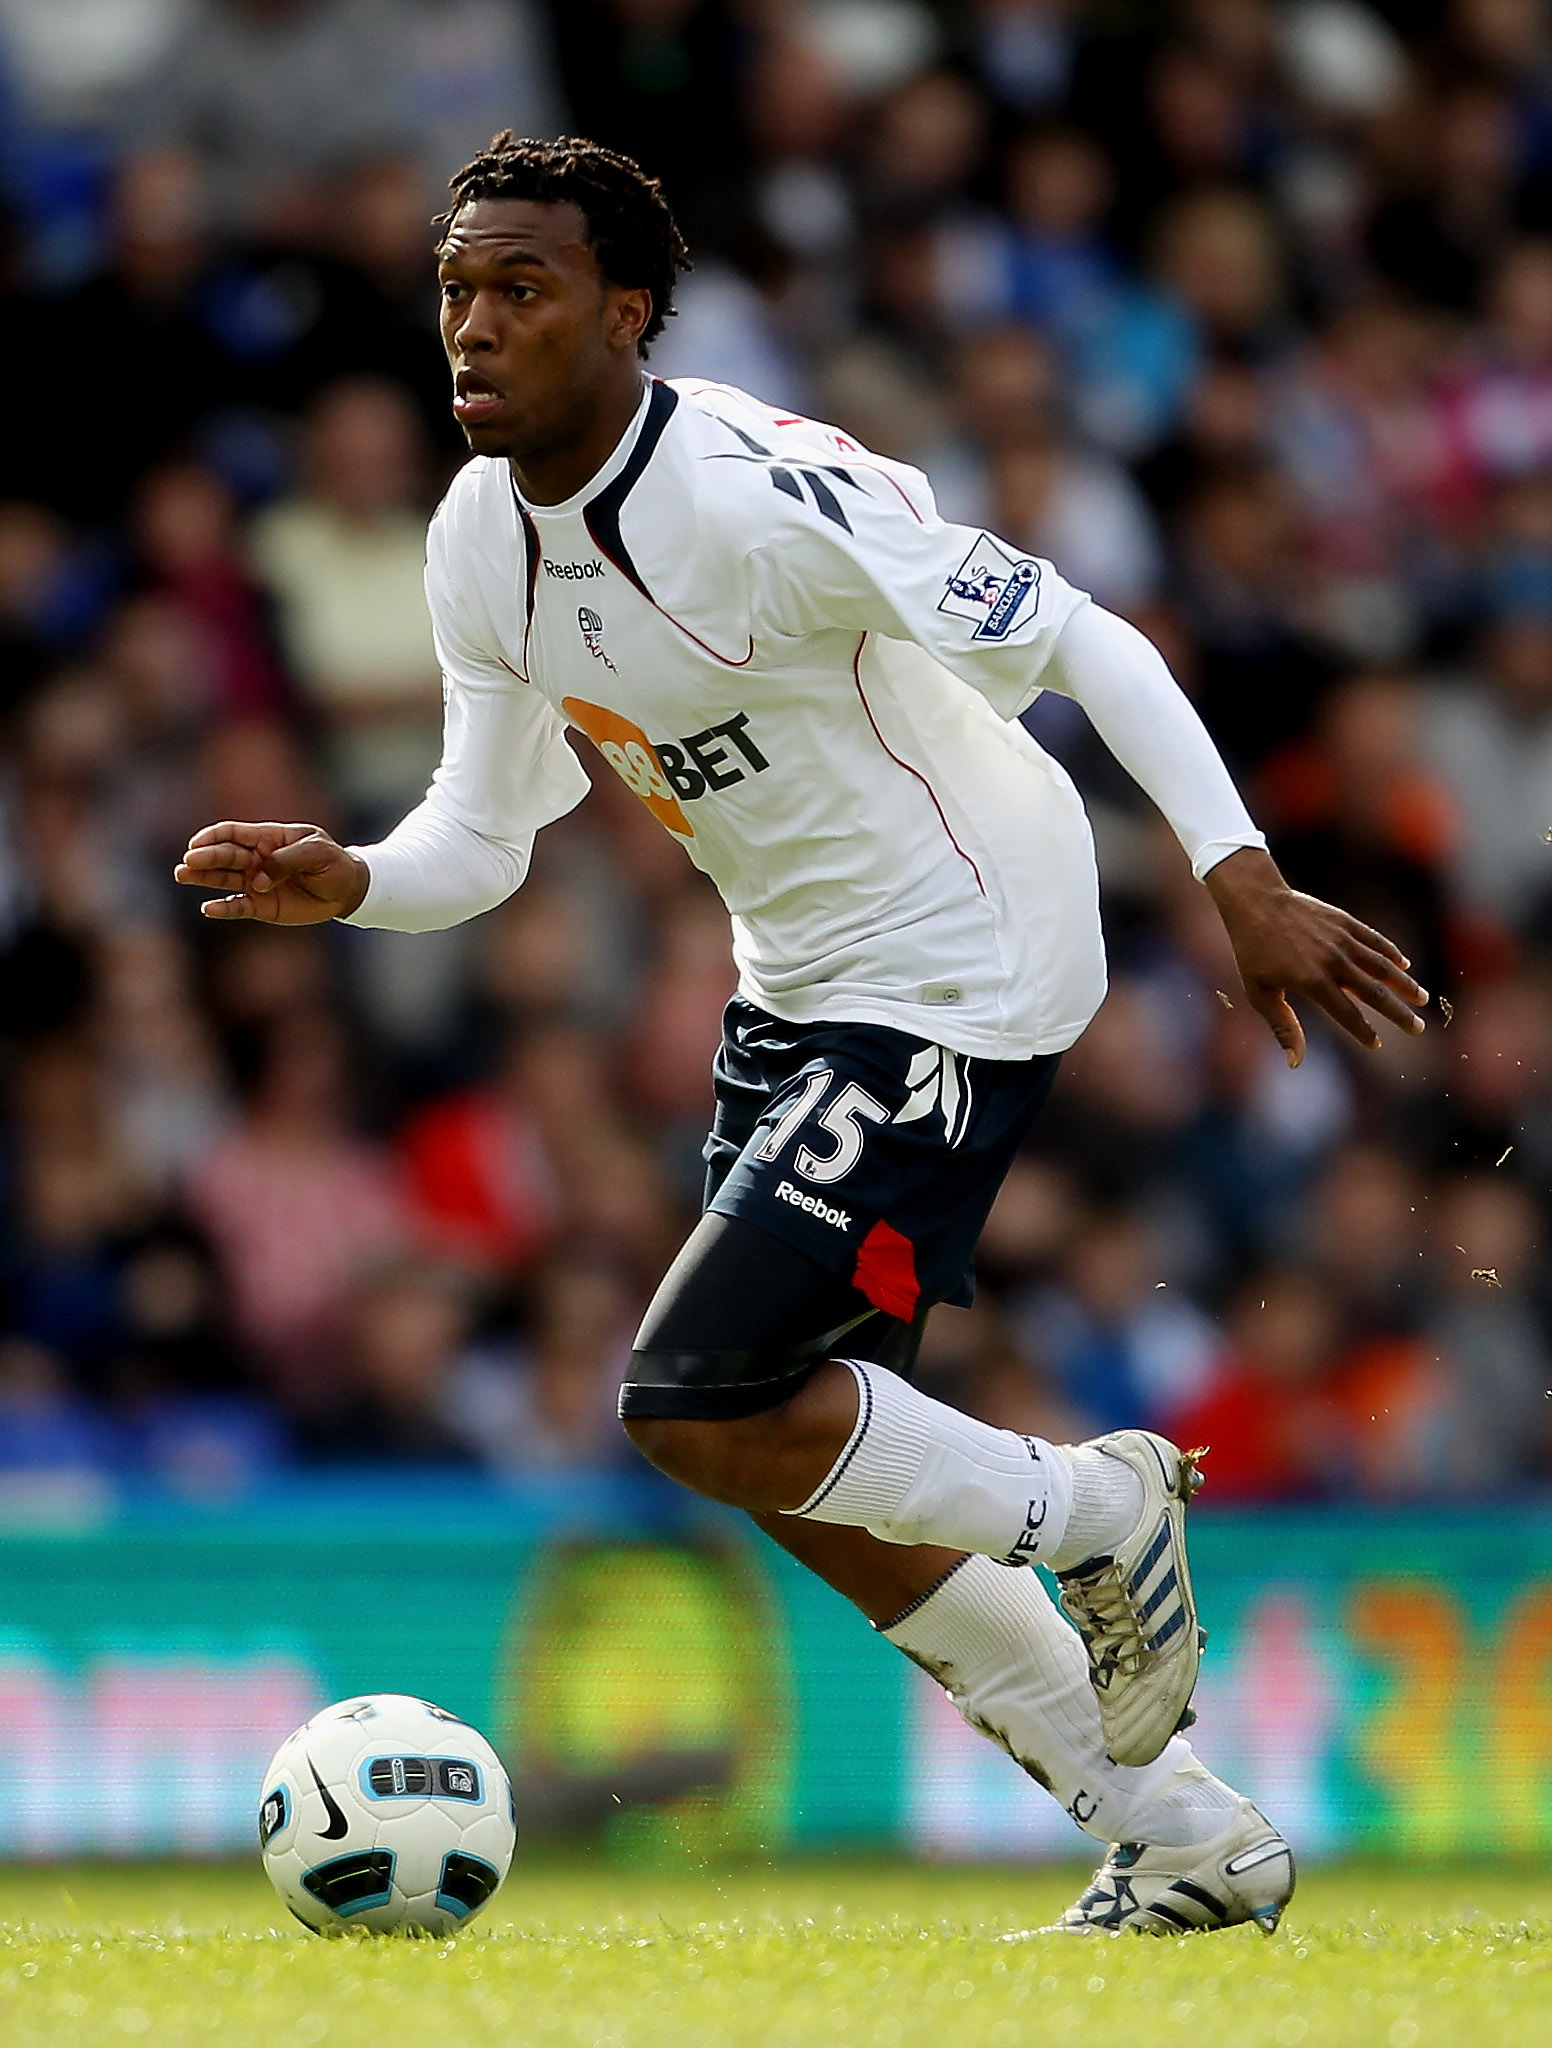 BIRMINGHAM, ENGLAND - APRIL 02:  Daniel Sturridge of Bolton in action during the Barclays Premier League match between Birmingham City and Bolton Wanderers at St.Andrews on April 2, 2011 in Birmingham, England.  (Photo by Scott Heavey/Getty Images)